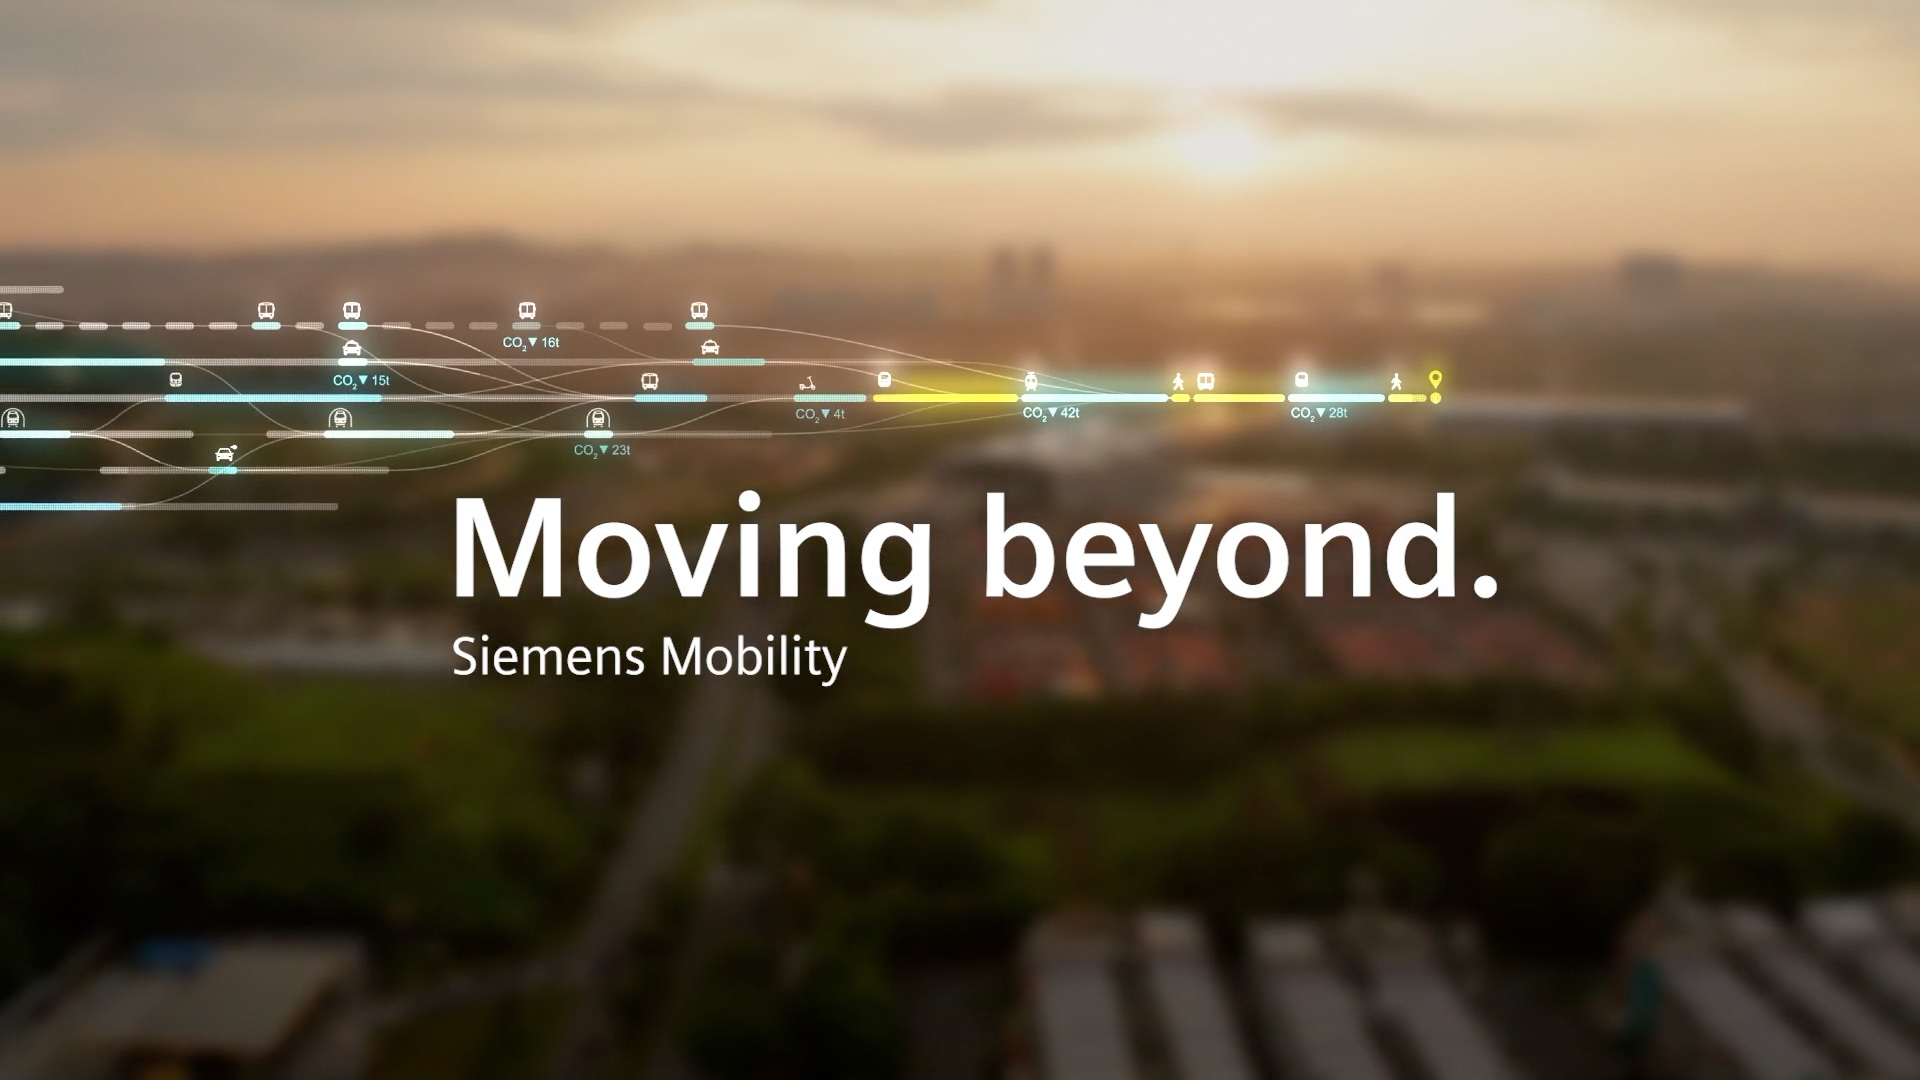 Siemens Mobility – Moving beyond